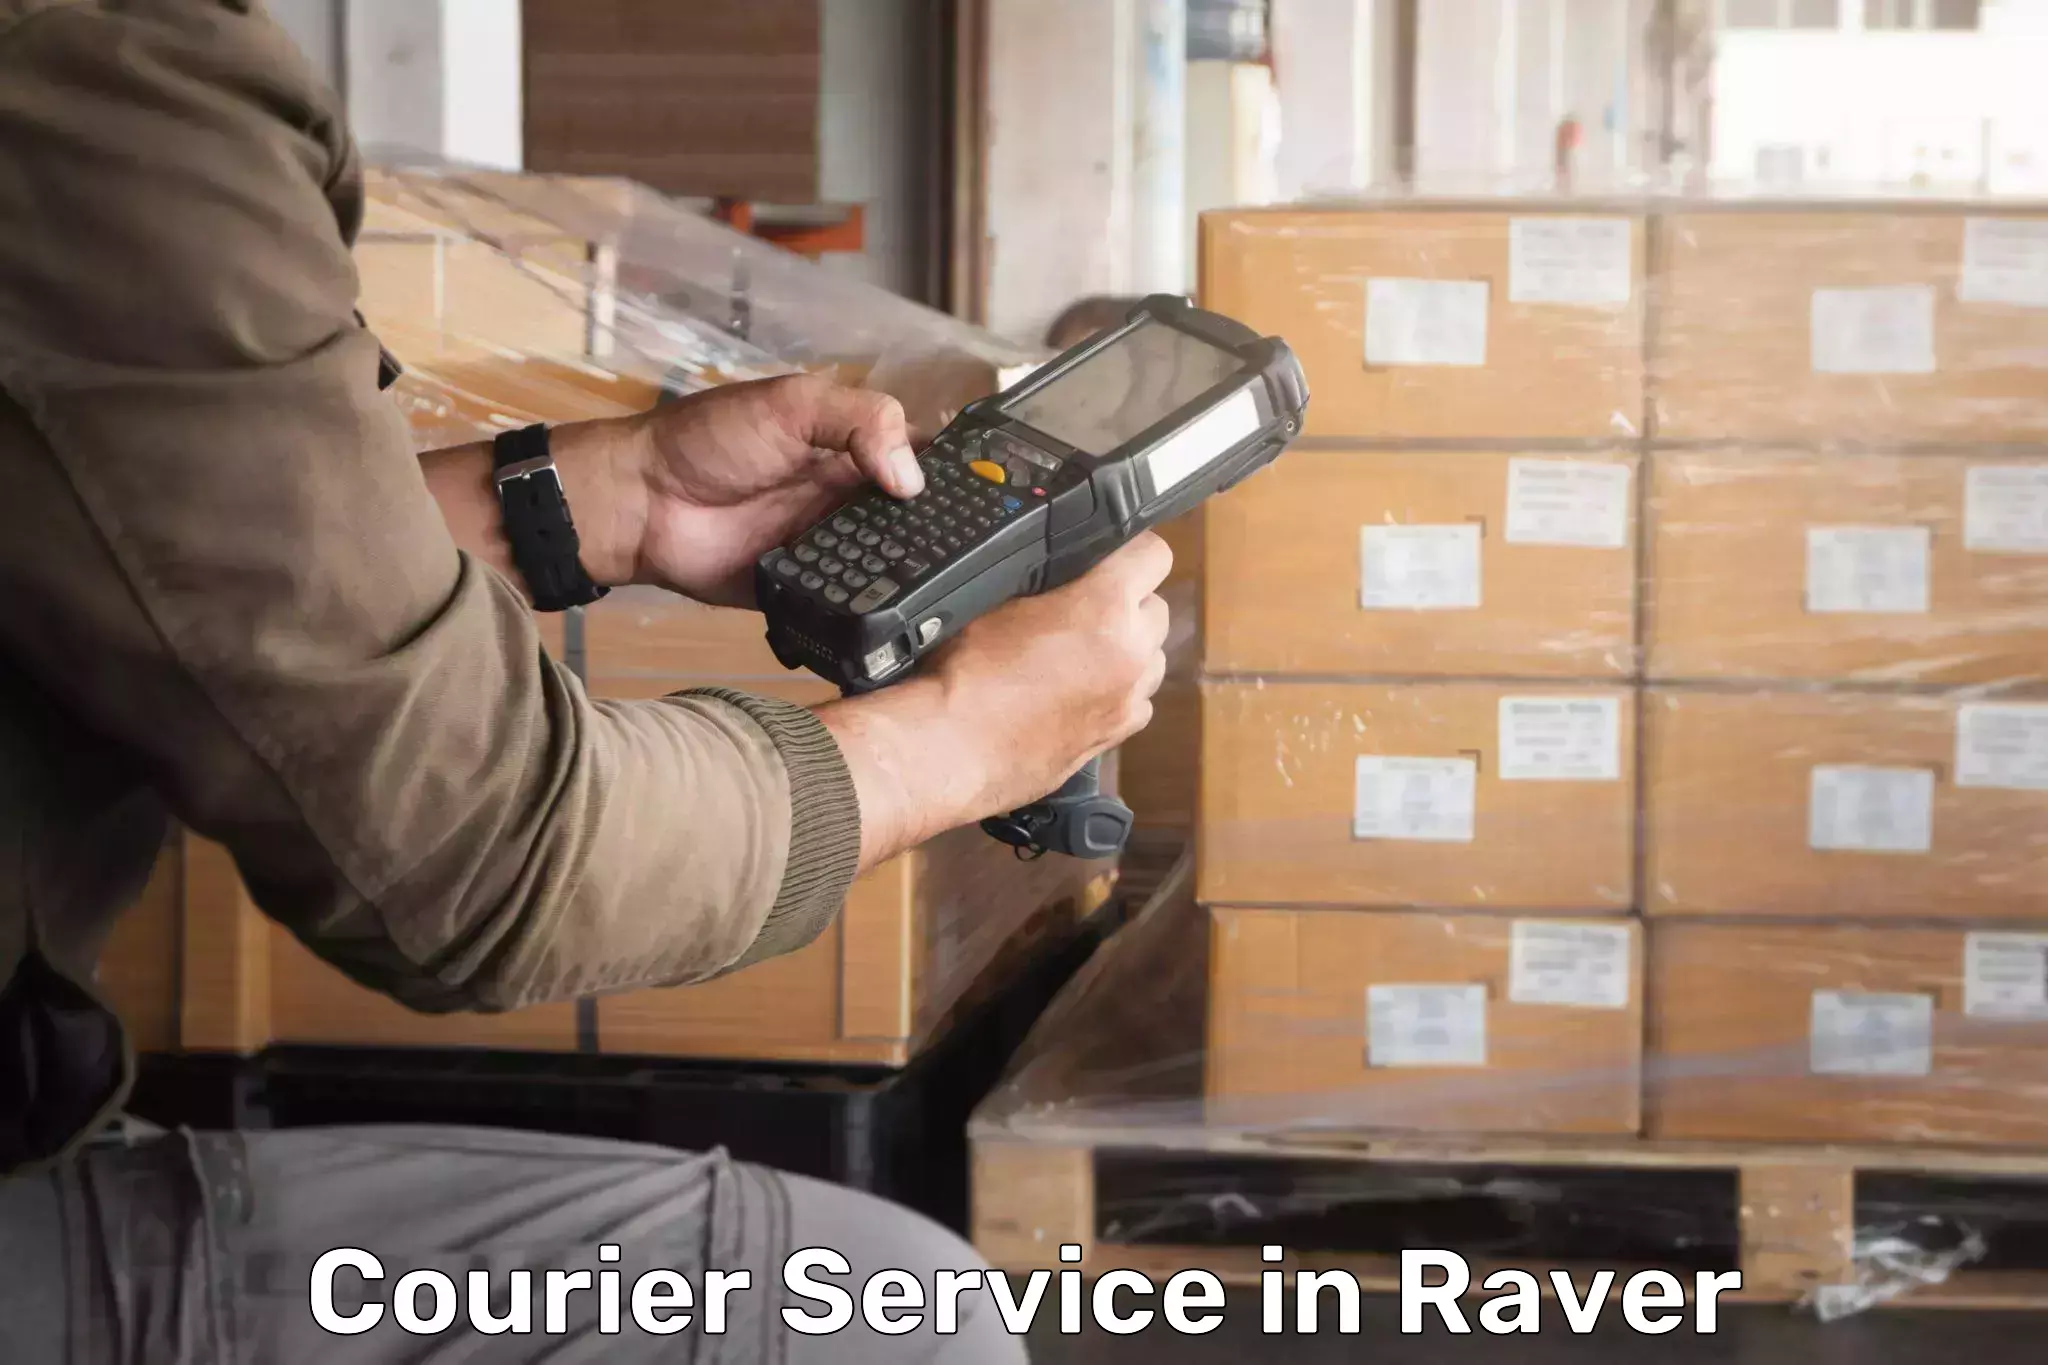 Cash on delivery service in Raver